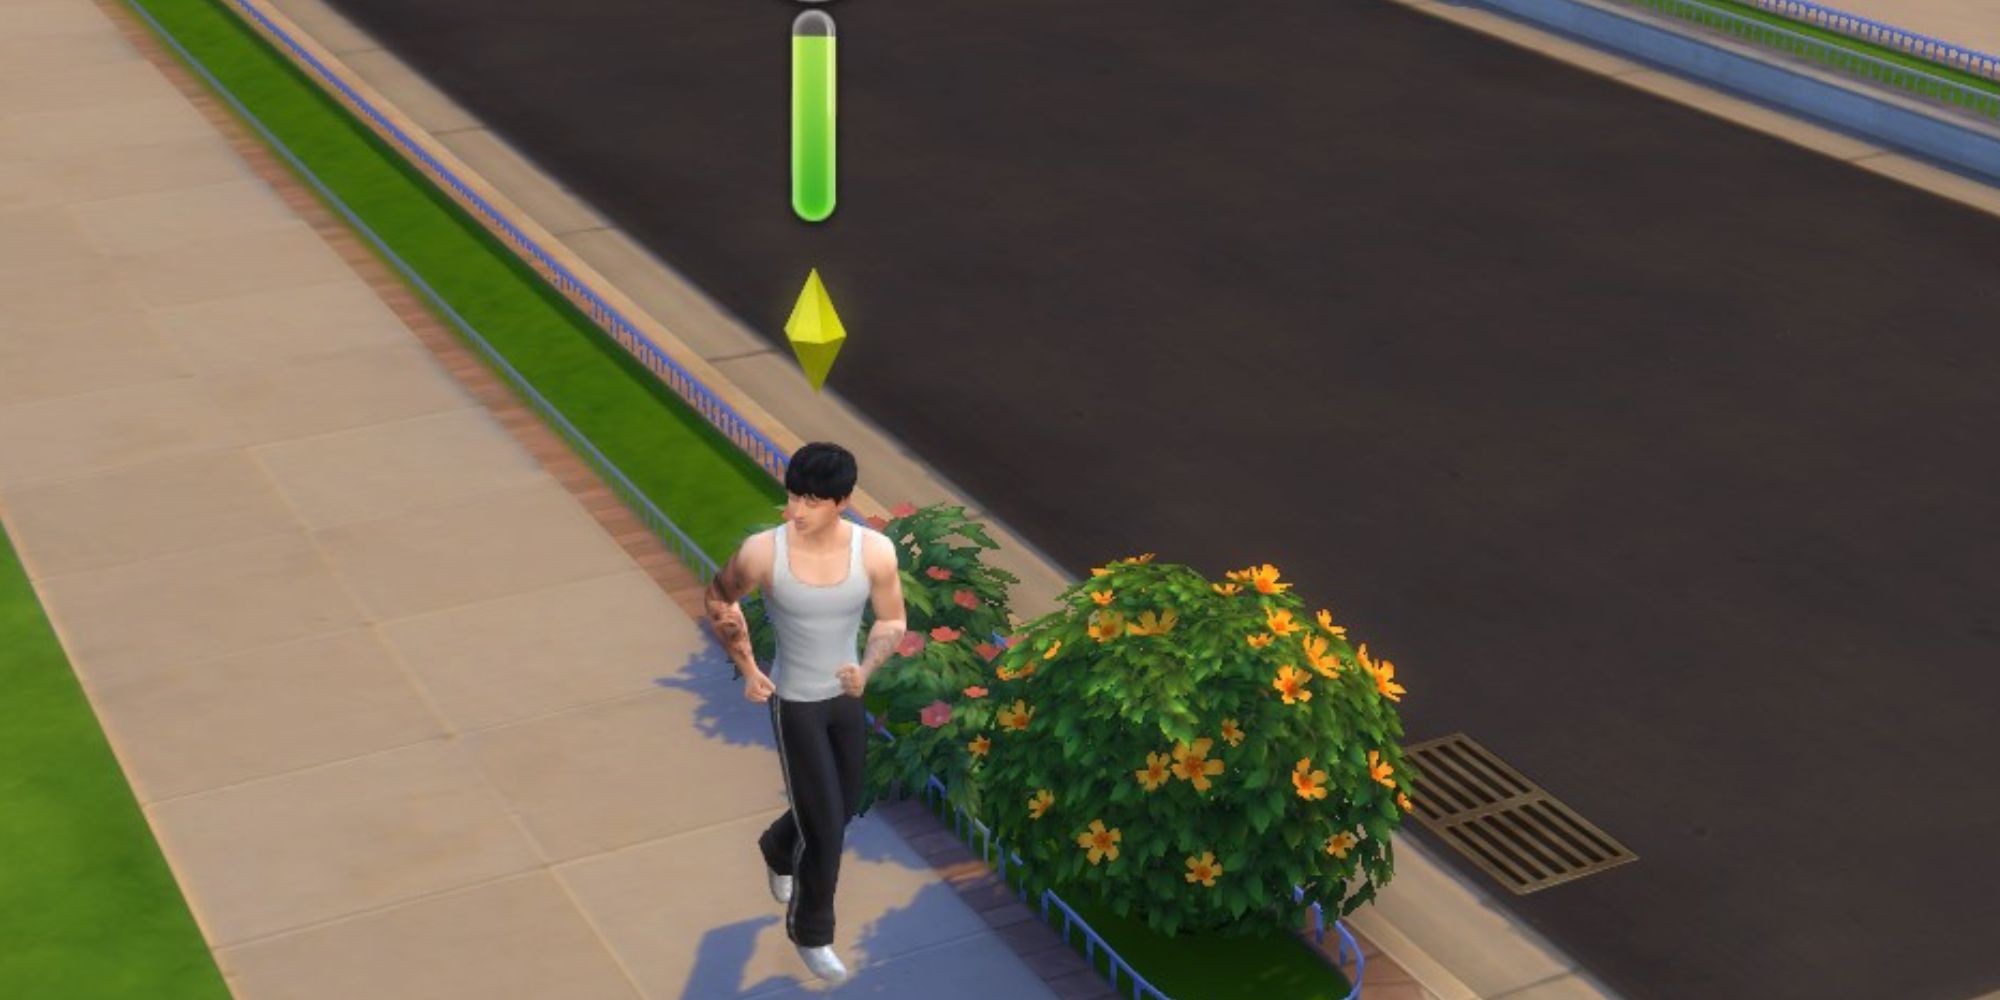 evil sim jogging on the streets in the sims 4